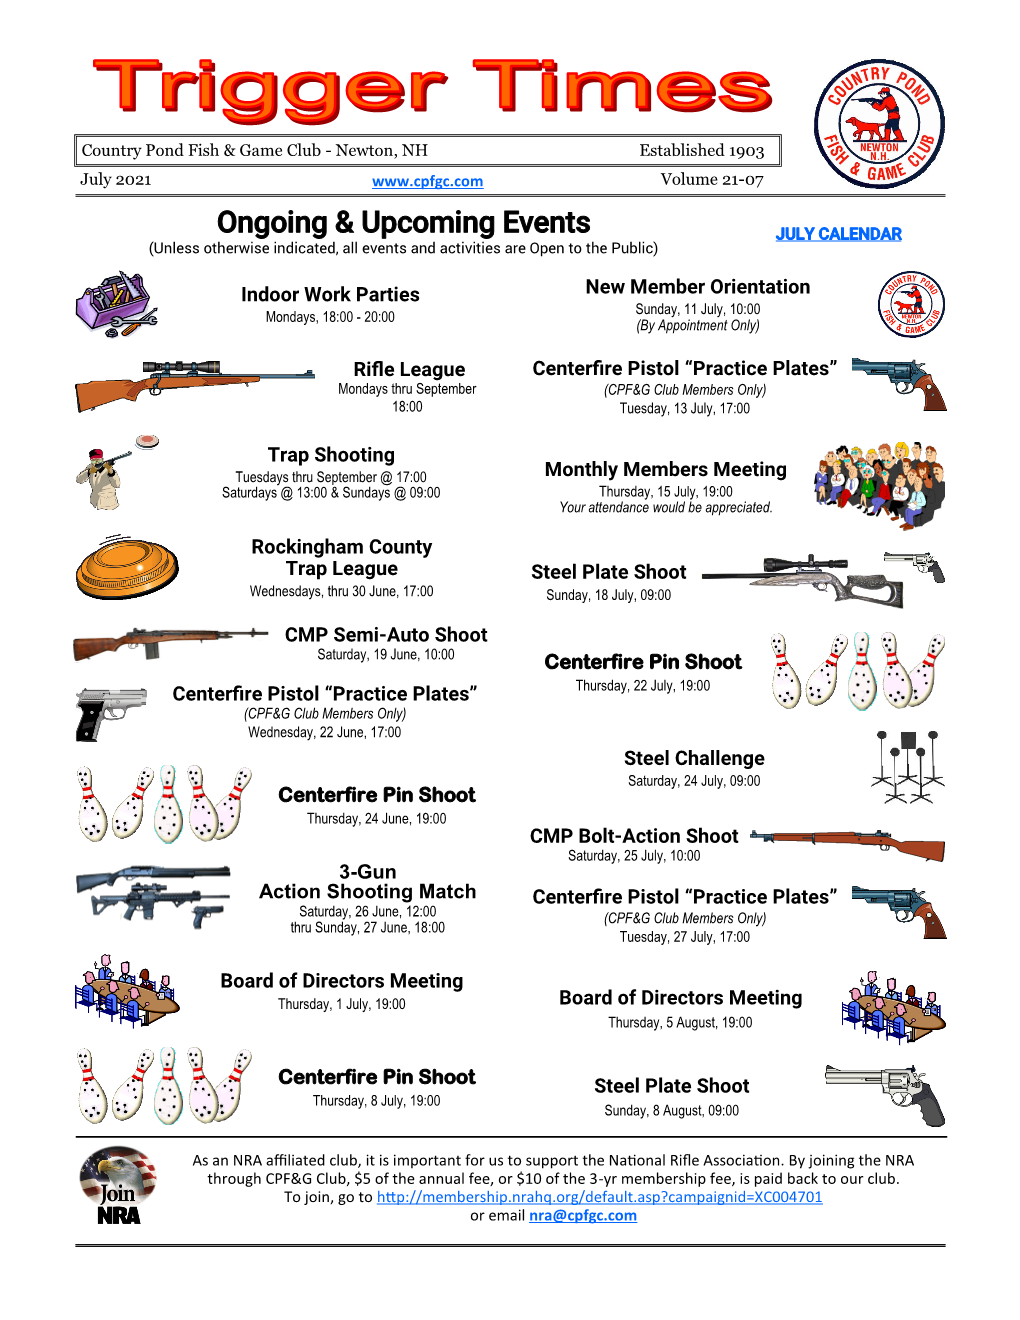 Ongoing & Upcoming Events